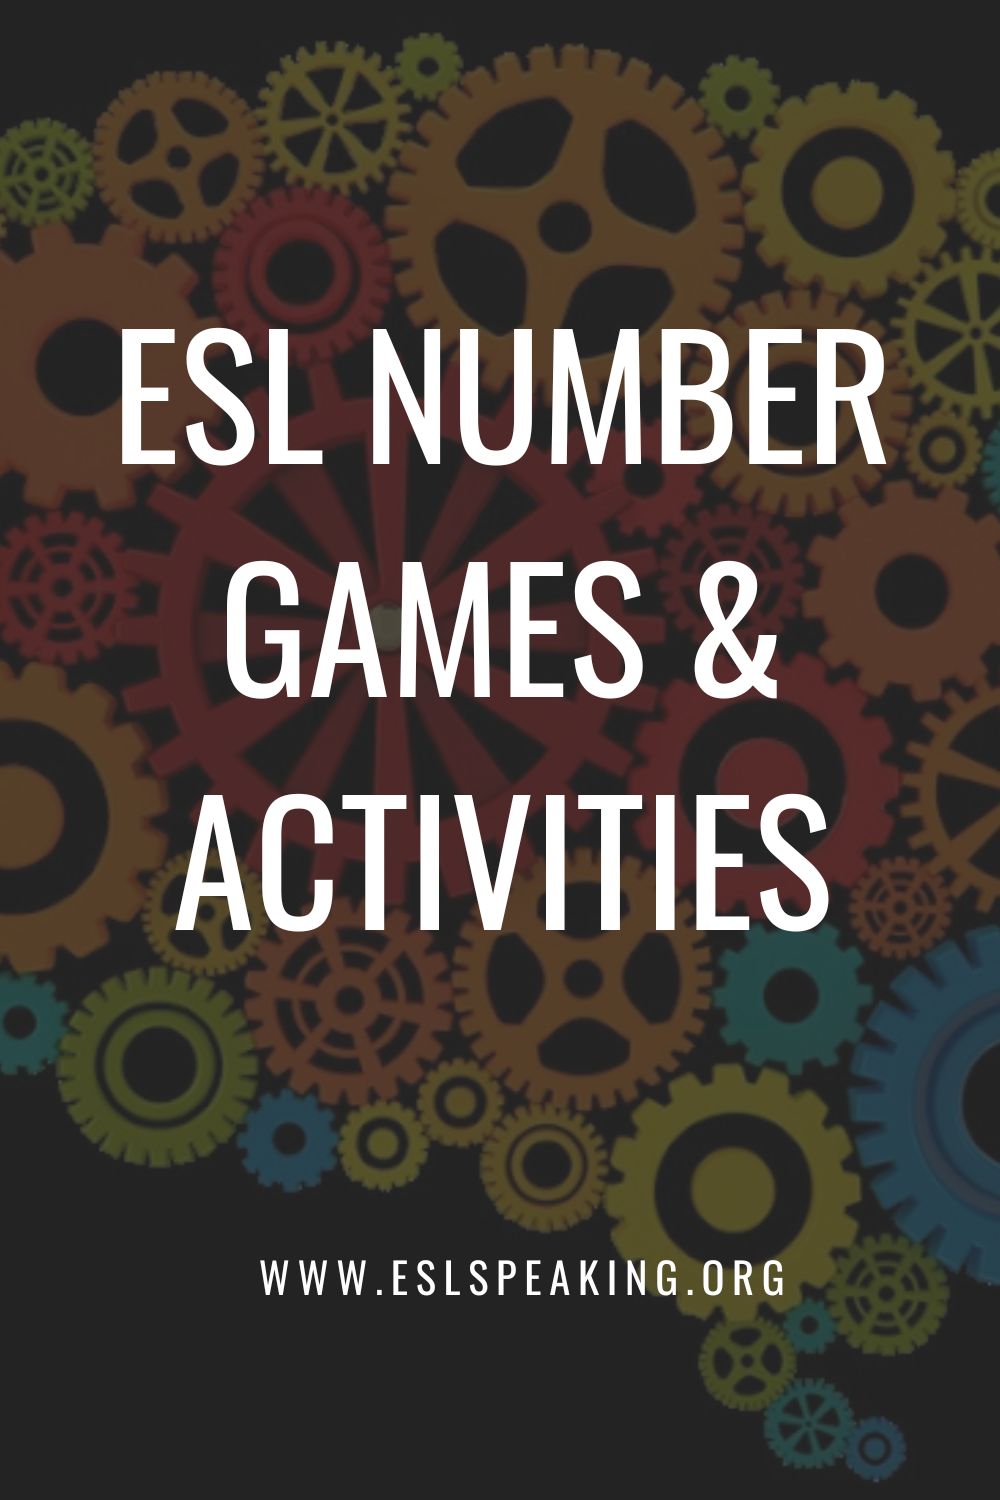 fun-numbers-games-activities-worksheets-lessons-for-esl